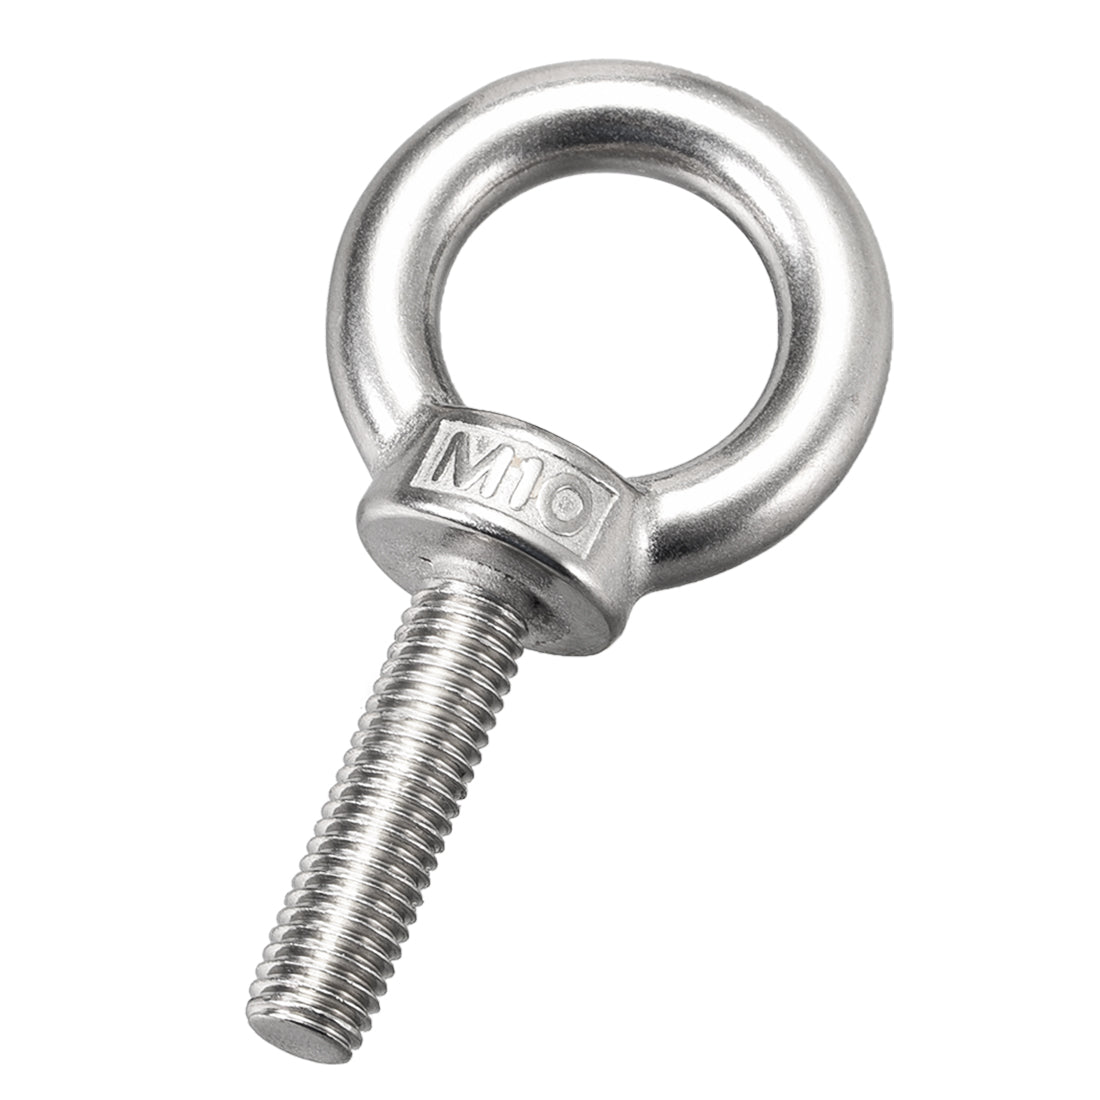 uxcell Uxcell 5 Pcs M10x40mm Thread 25mm Inside Dia 42mm Outside Dia 304 Stainless Steel Lifting Eye Bolt